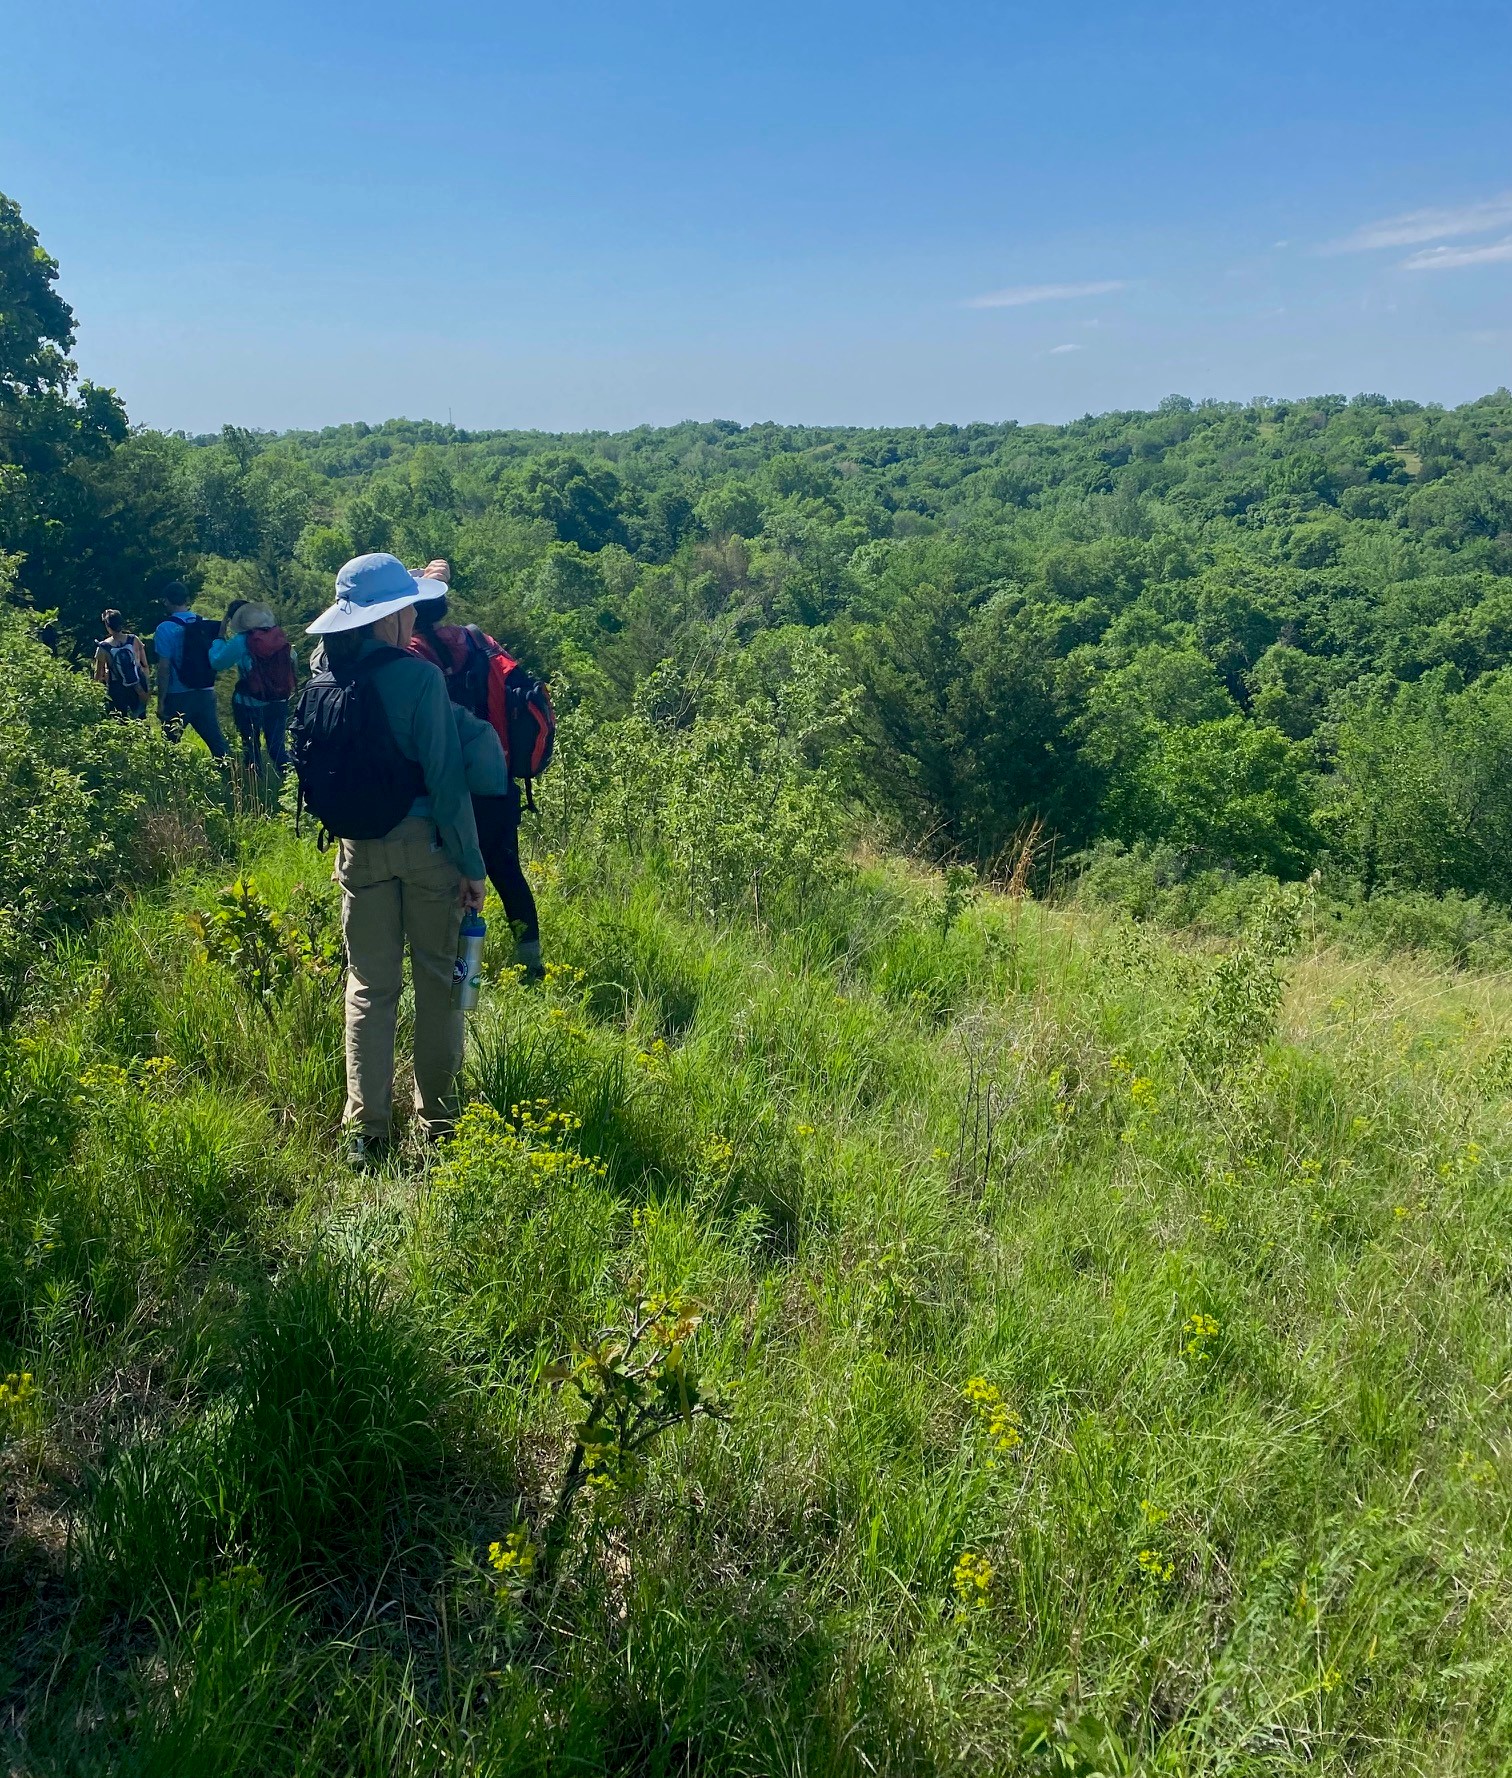 Experiencing Iowa's beautiful northern Loess Hills on foot